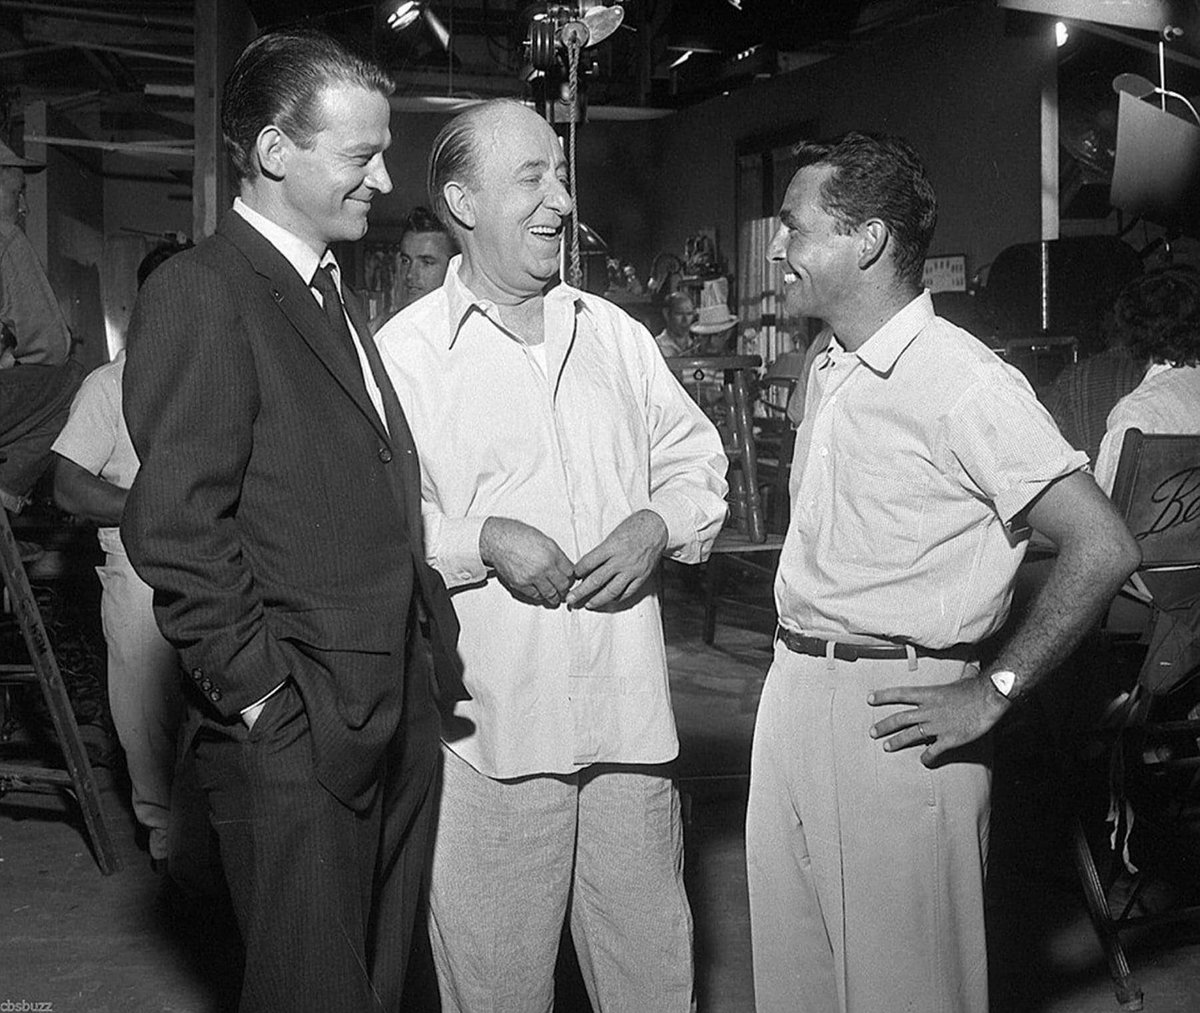 Today's cool photo, from L to R:
Murray 'Mayor in 'Jaws' Hamilton, comic Ed Wynn & Master Rod Serling.
They're on the set of the S01E02 episode of #TheTwilightZone ....

#ATouchOfClass